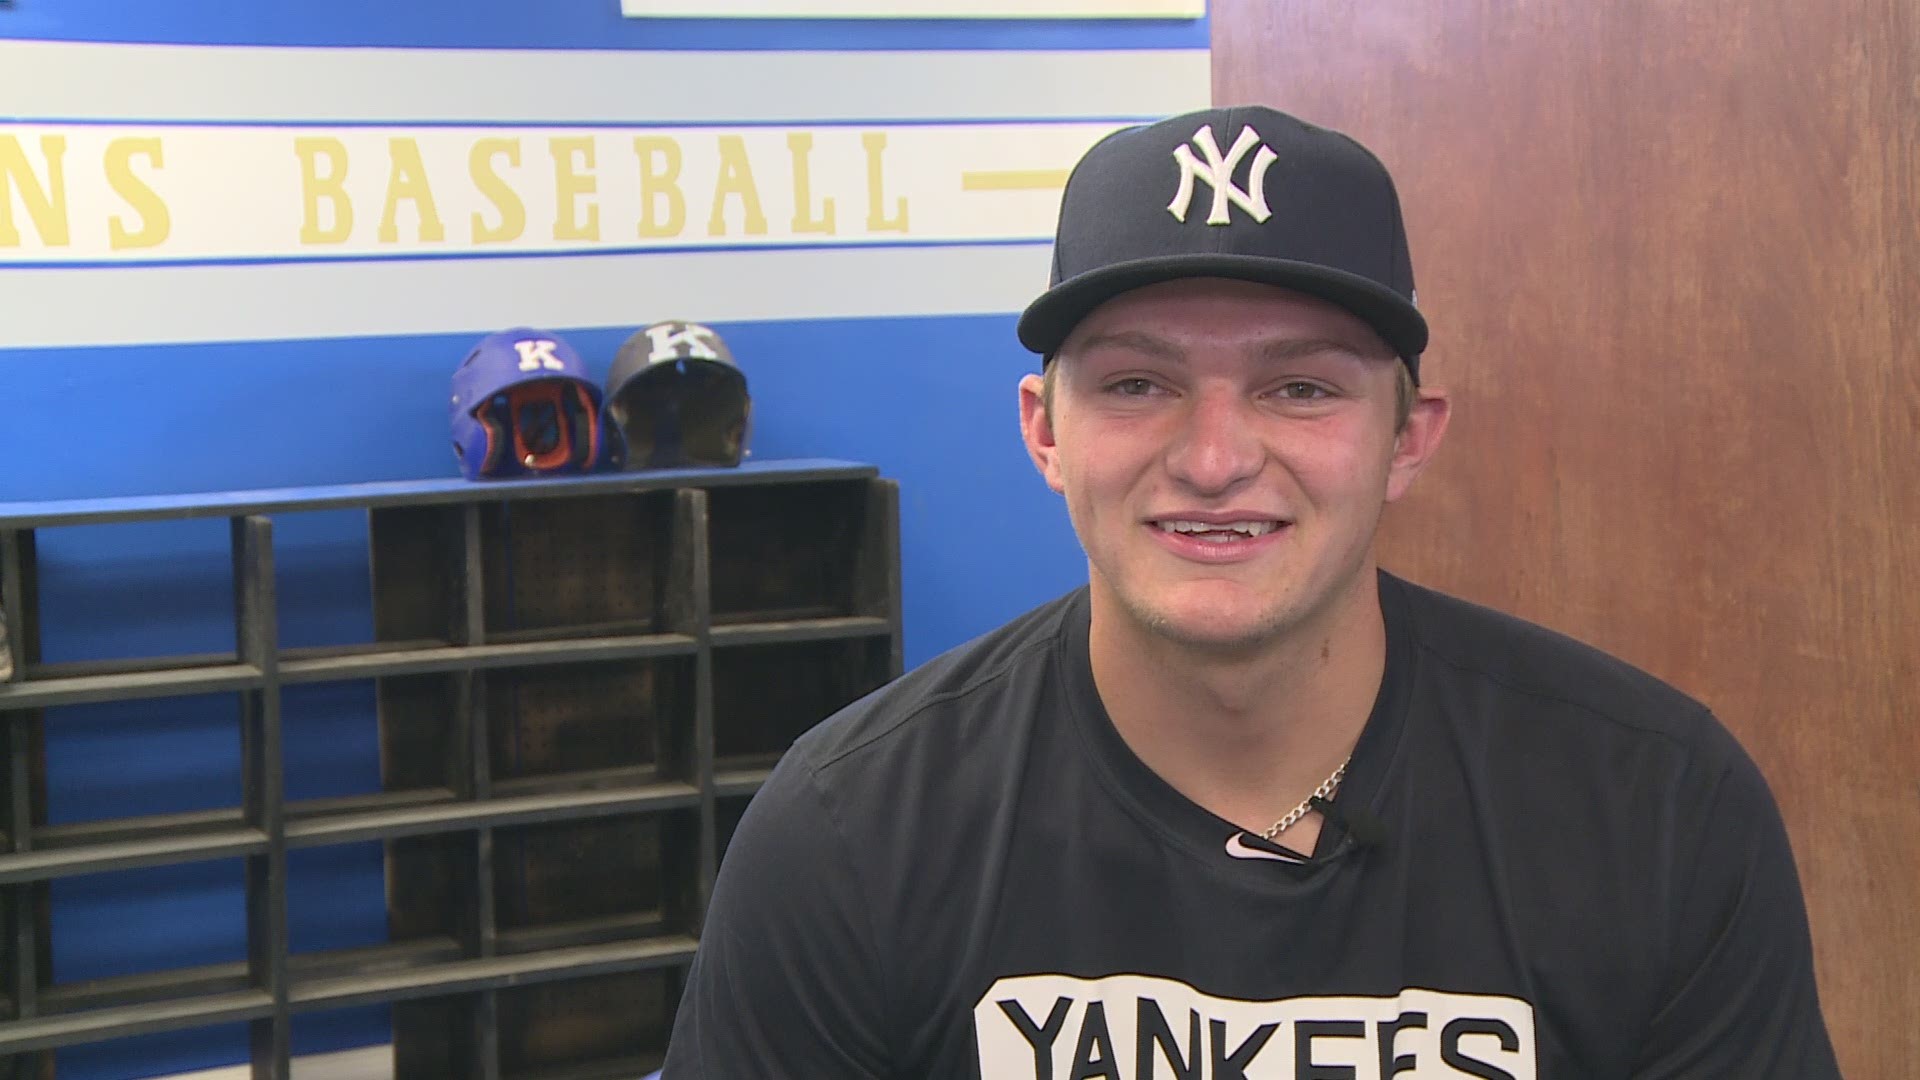 Karns High School outfielder Ryder Green was drafted by the New York Yankees in the third round (97th overall) of the 2018 MLB Draft.